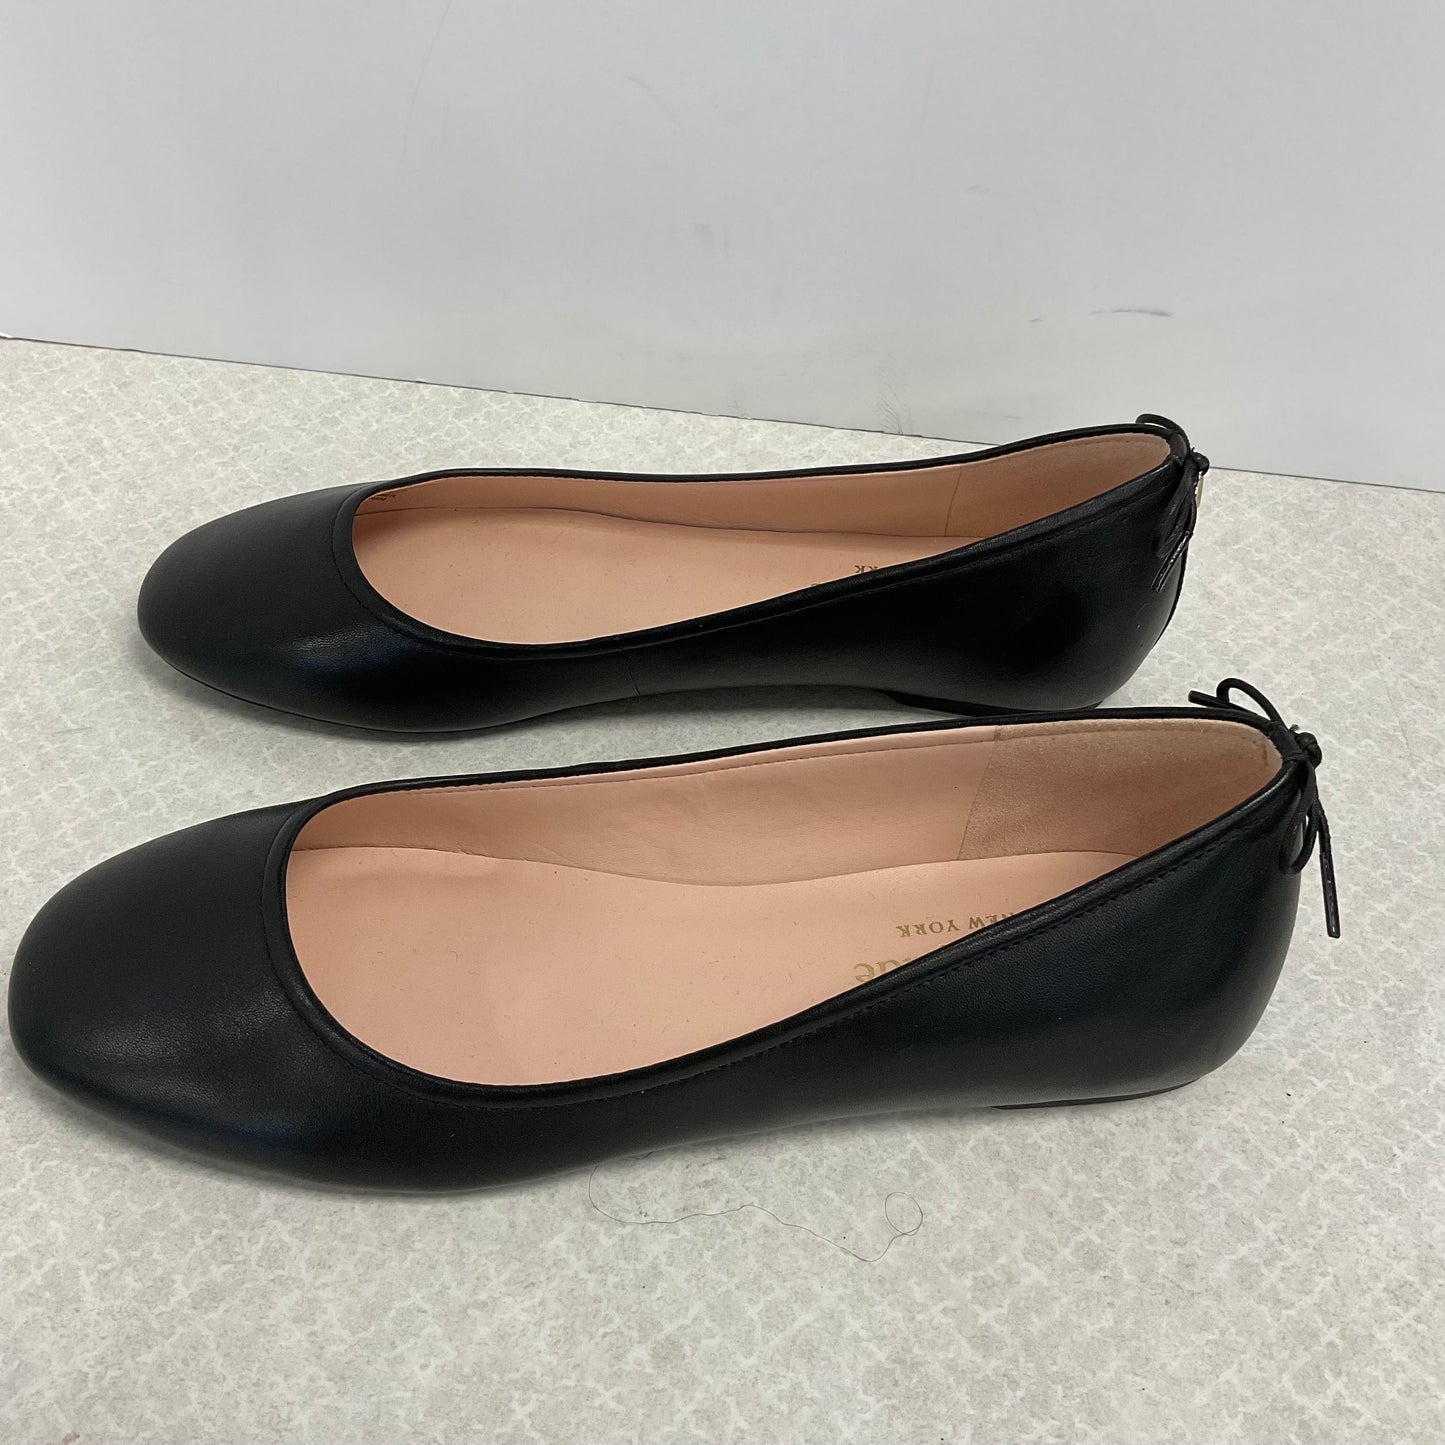 Shoes Flats By Kate Spade  Size: 7.5